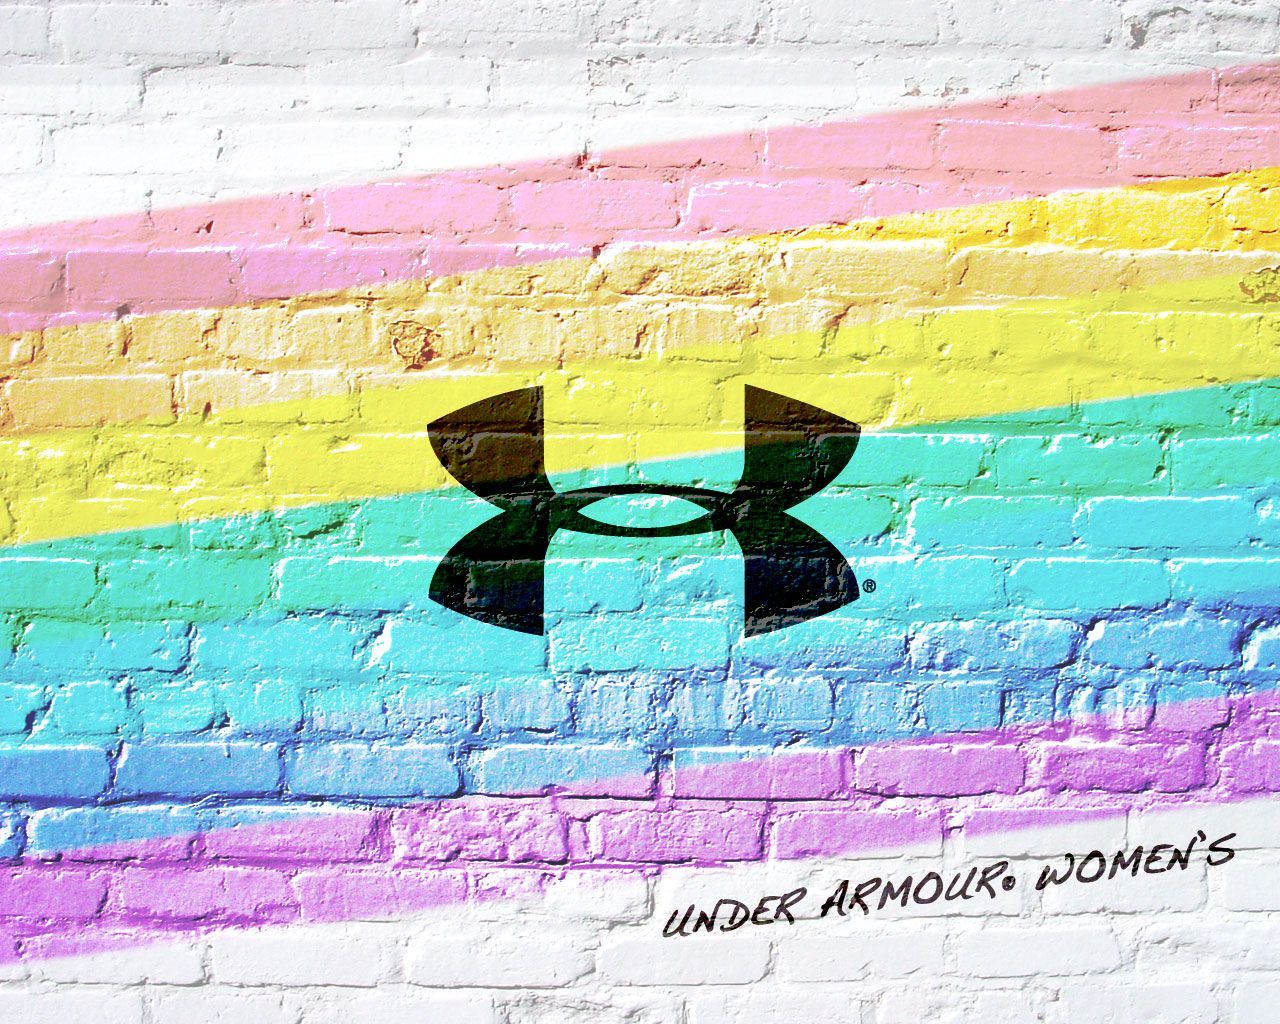 Cool Under Armor Wallpapers Wallpapers